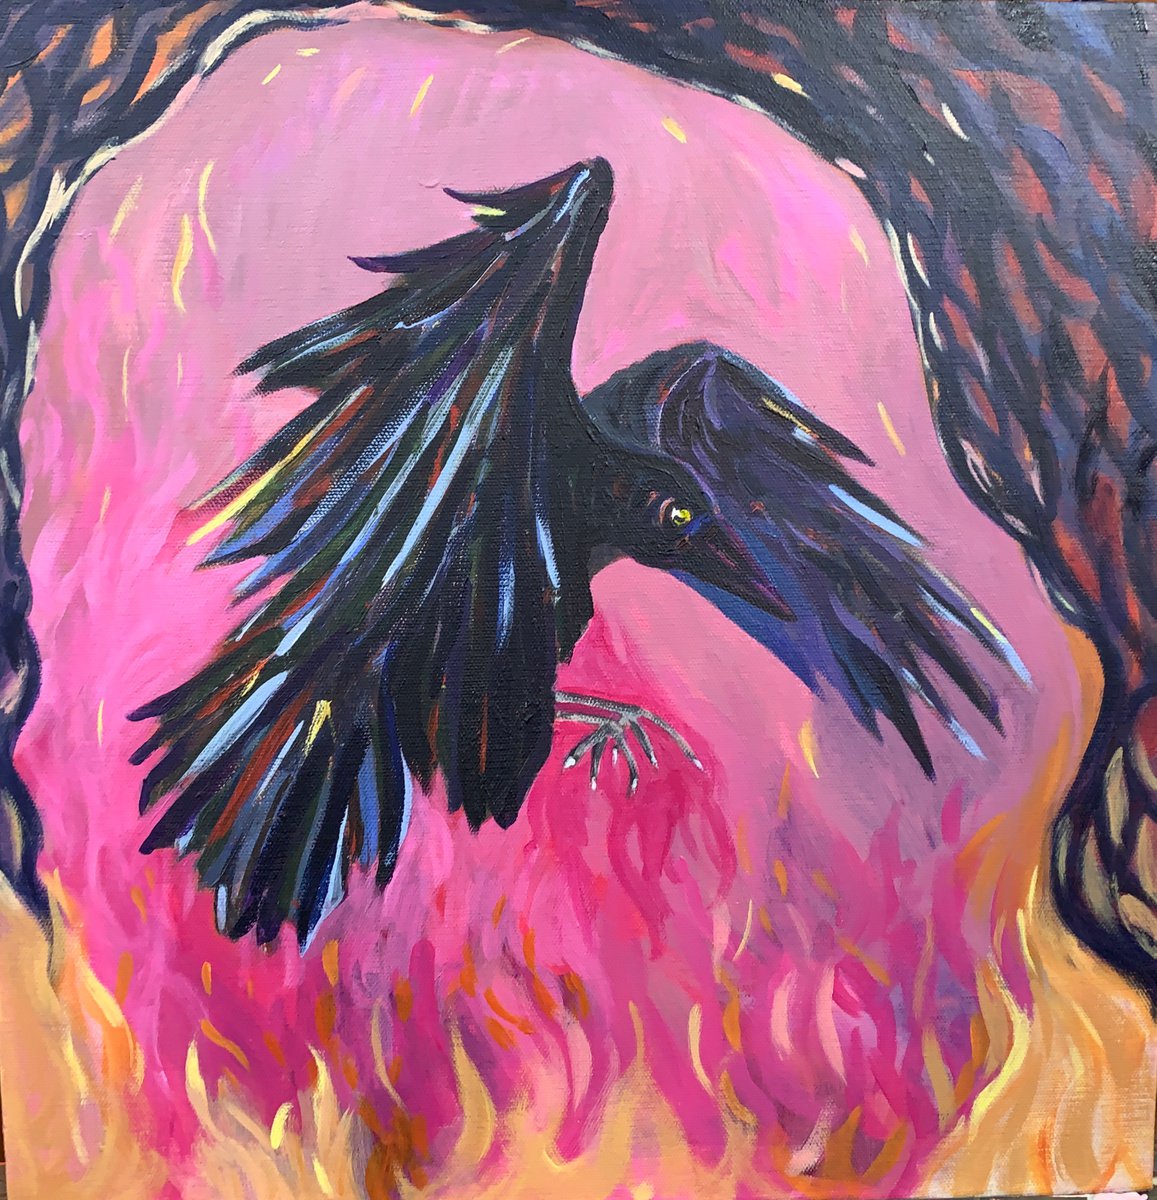 The Lost Raven by Hanna Bell